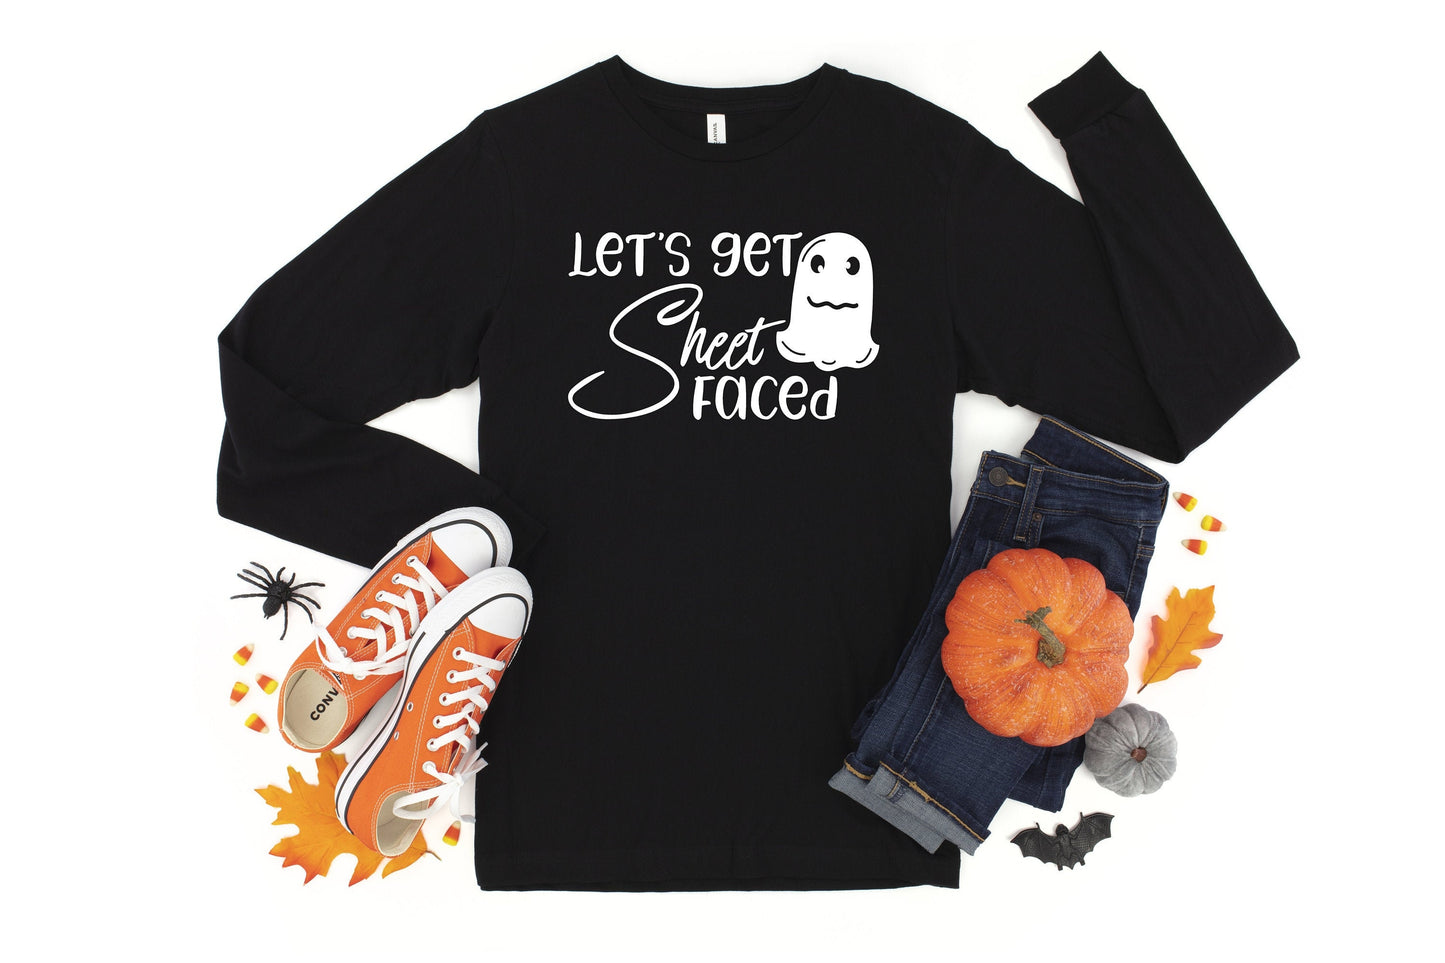 Let's Get Sheet Faced long sleeve t-shirt, trick or treating shirt, halloween party shirt